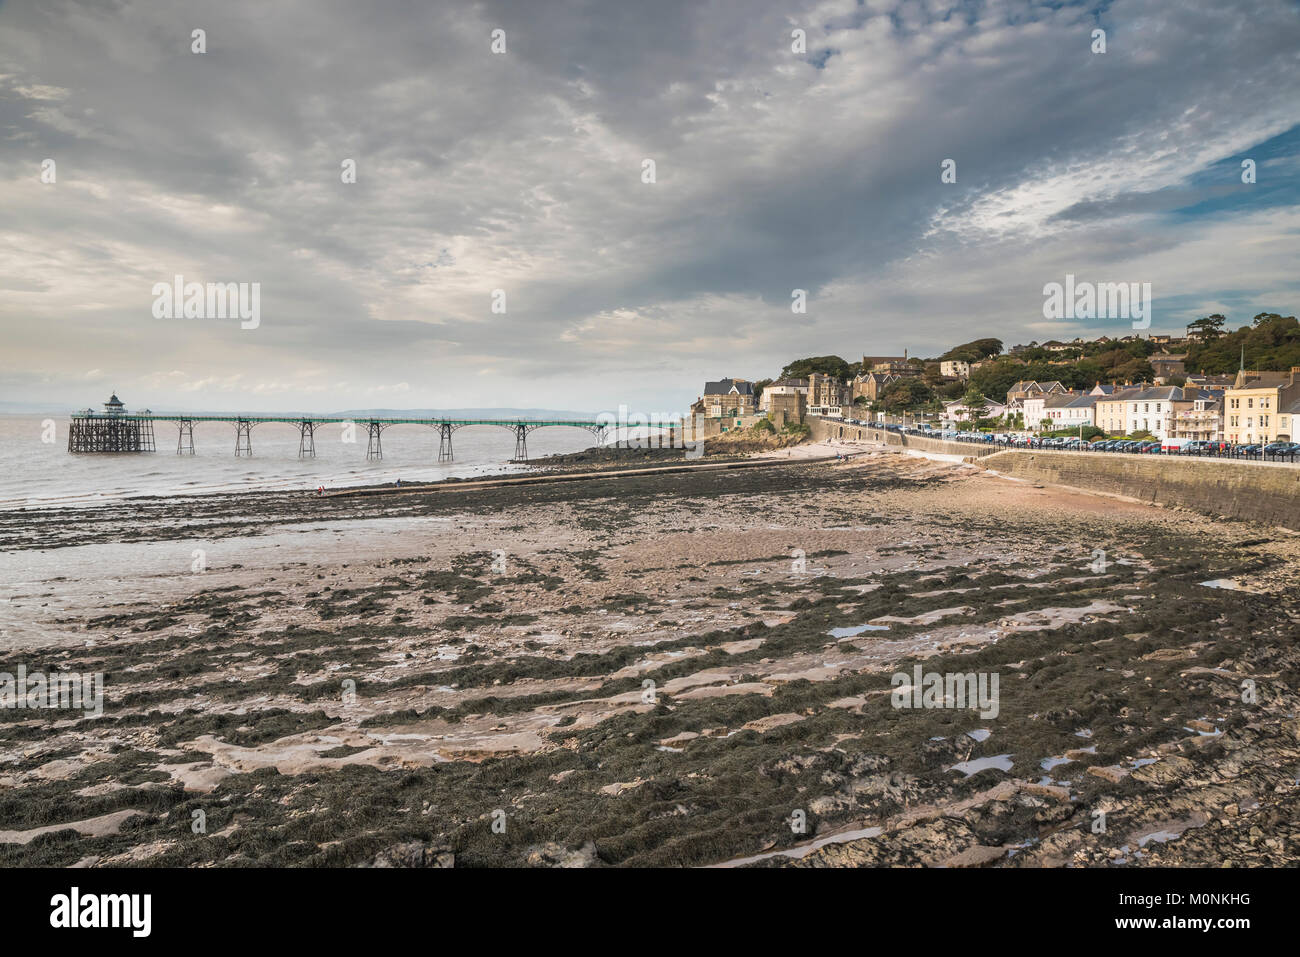 The beach and Victorian pier at Clevedon, Somerset, England Stock Photo